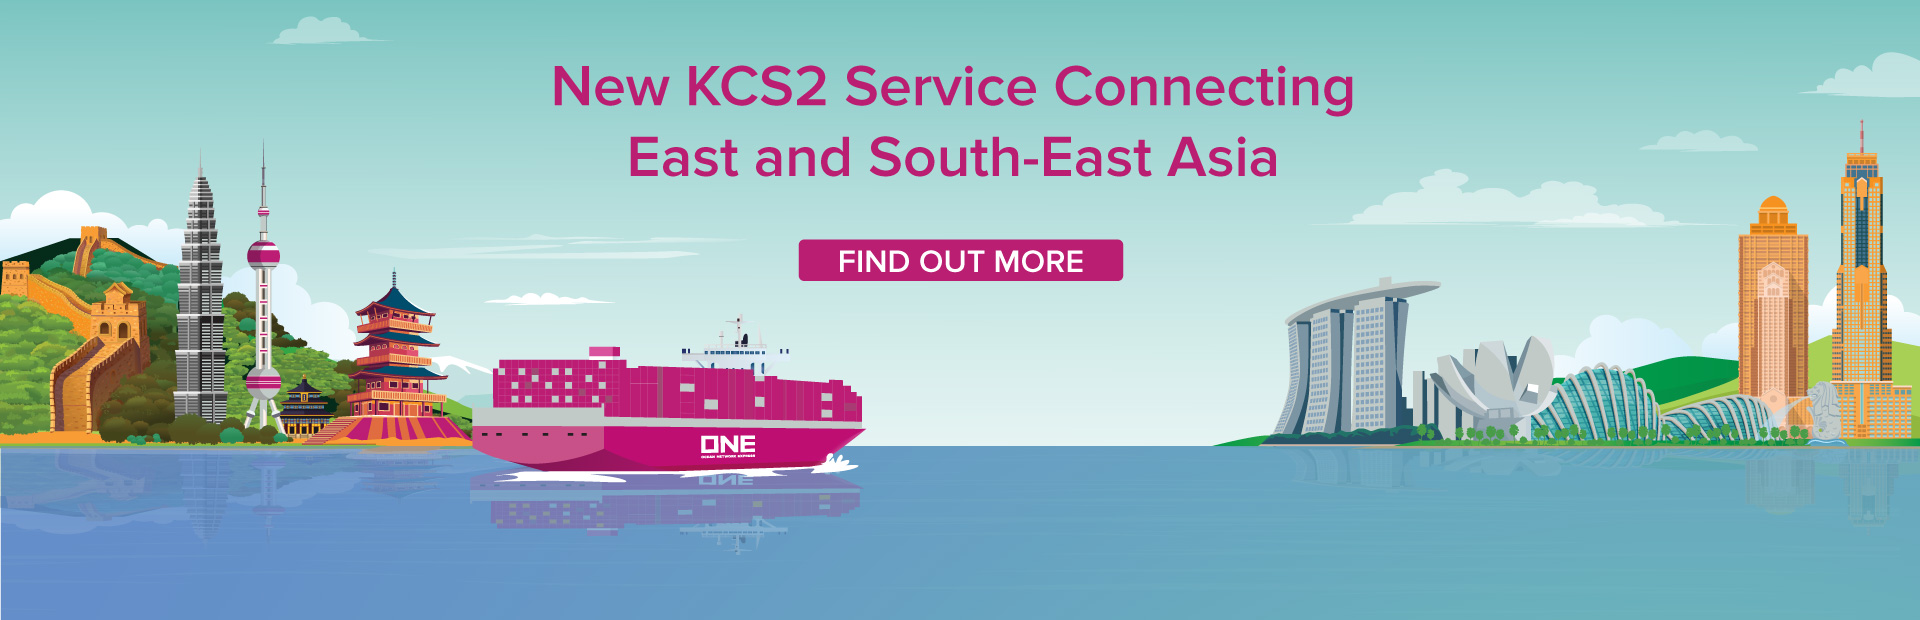 New KCS2 Service Connecting East and South-East Asia